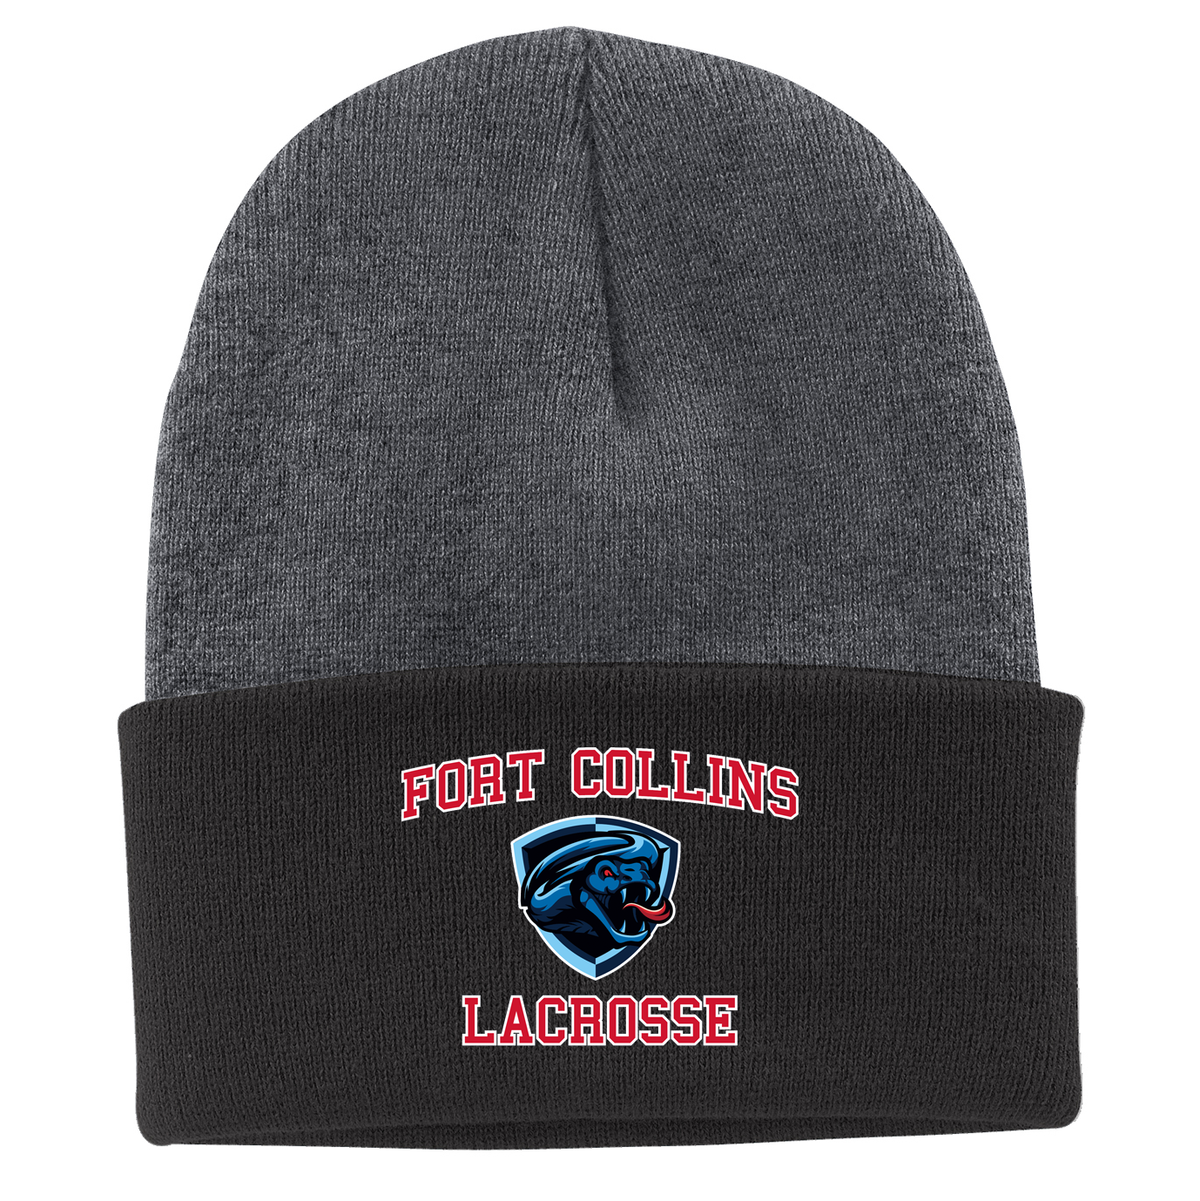 Fort Collins Lacrosse  Knit Beanie